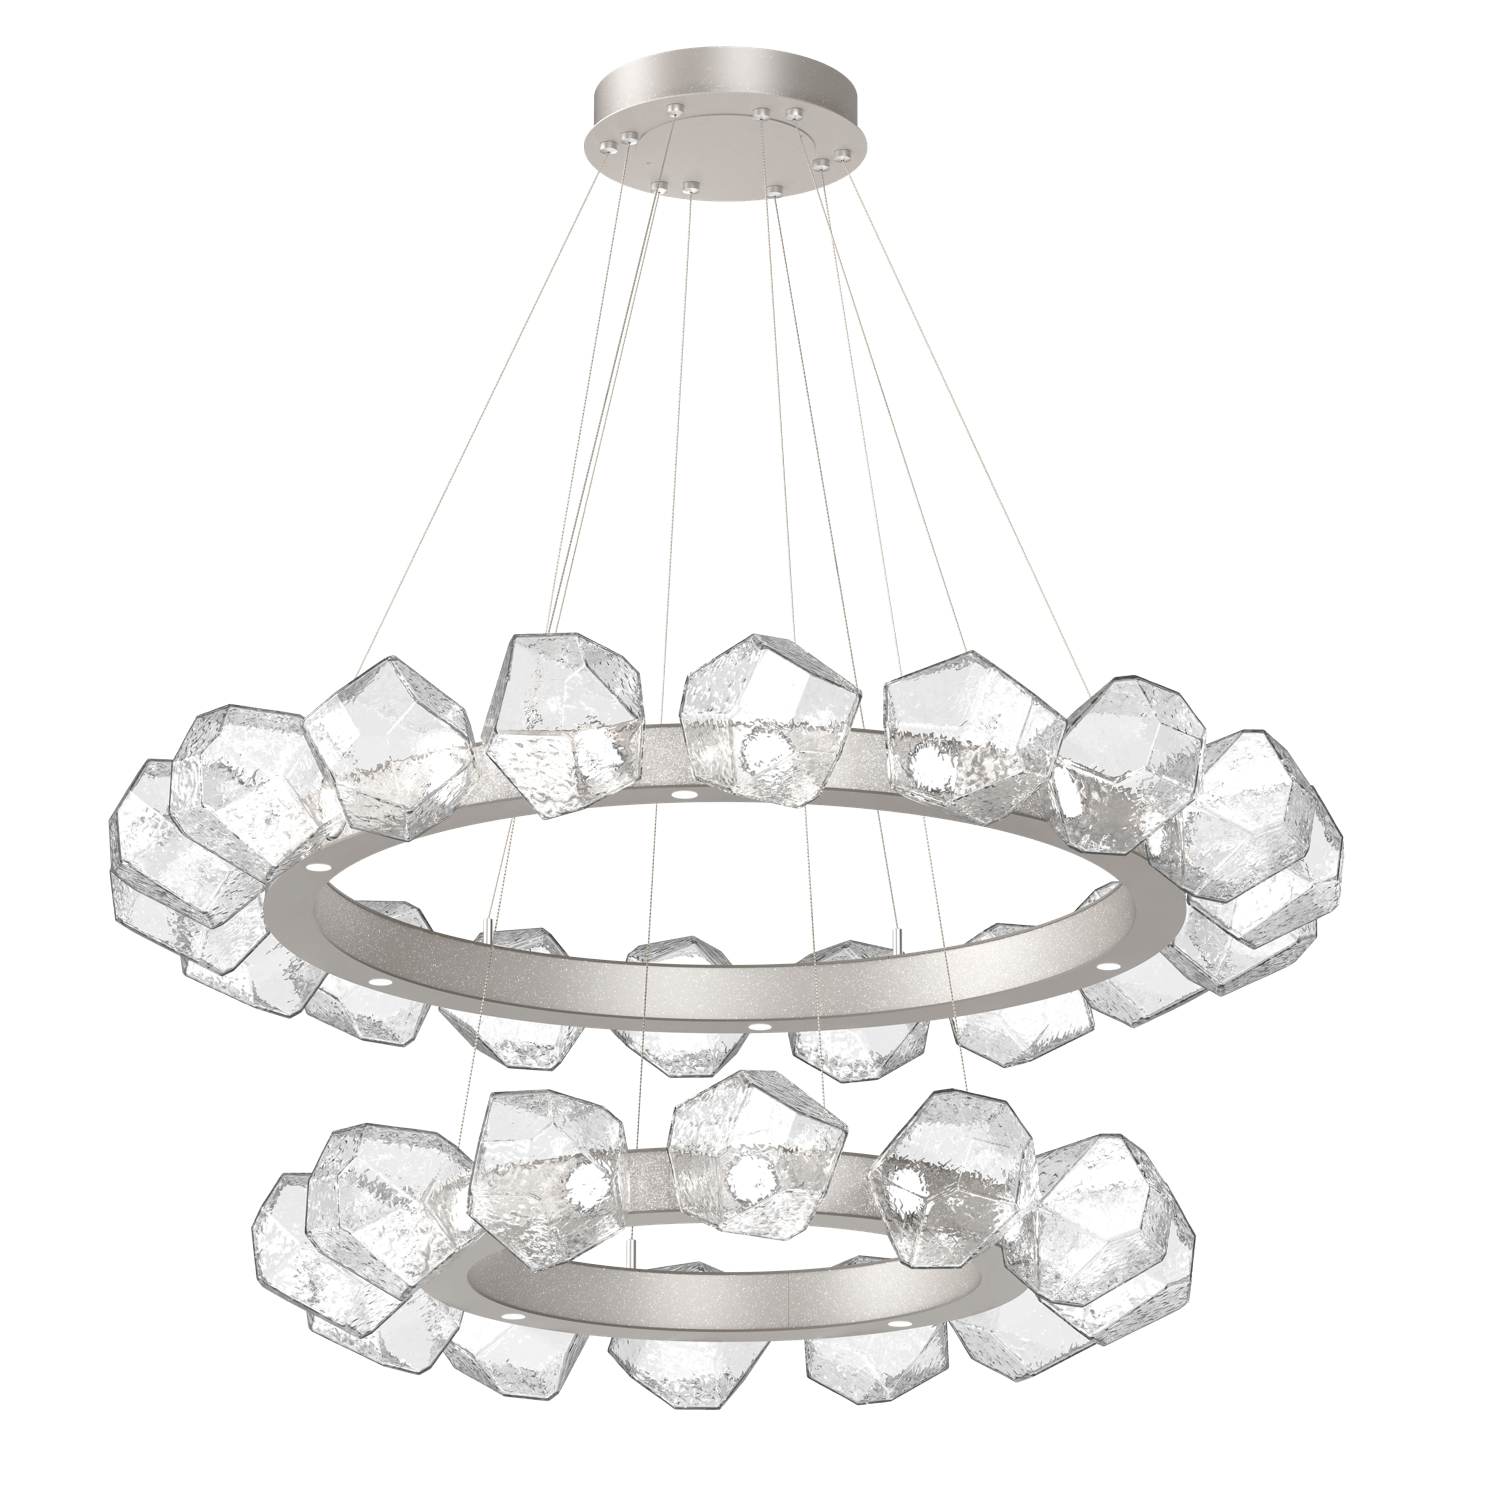 CHB0039-2T-BS-C-Hammerton-Studio-Gem-48-inch-two-tier-radial-ring-chandelier-with-metallic-beige-silver-finish-and-clear-blown-glass-shades-and-LED-lamping